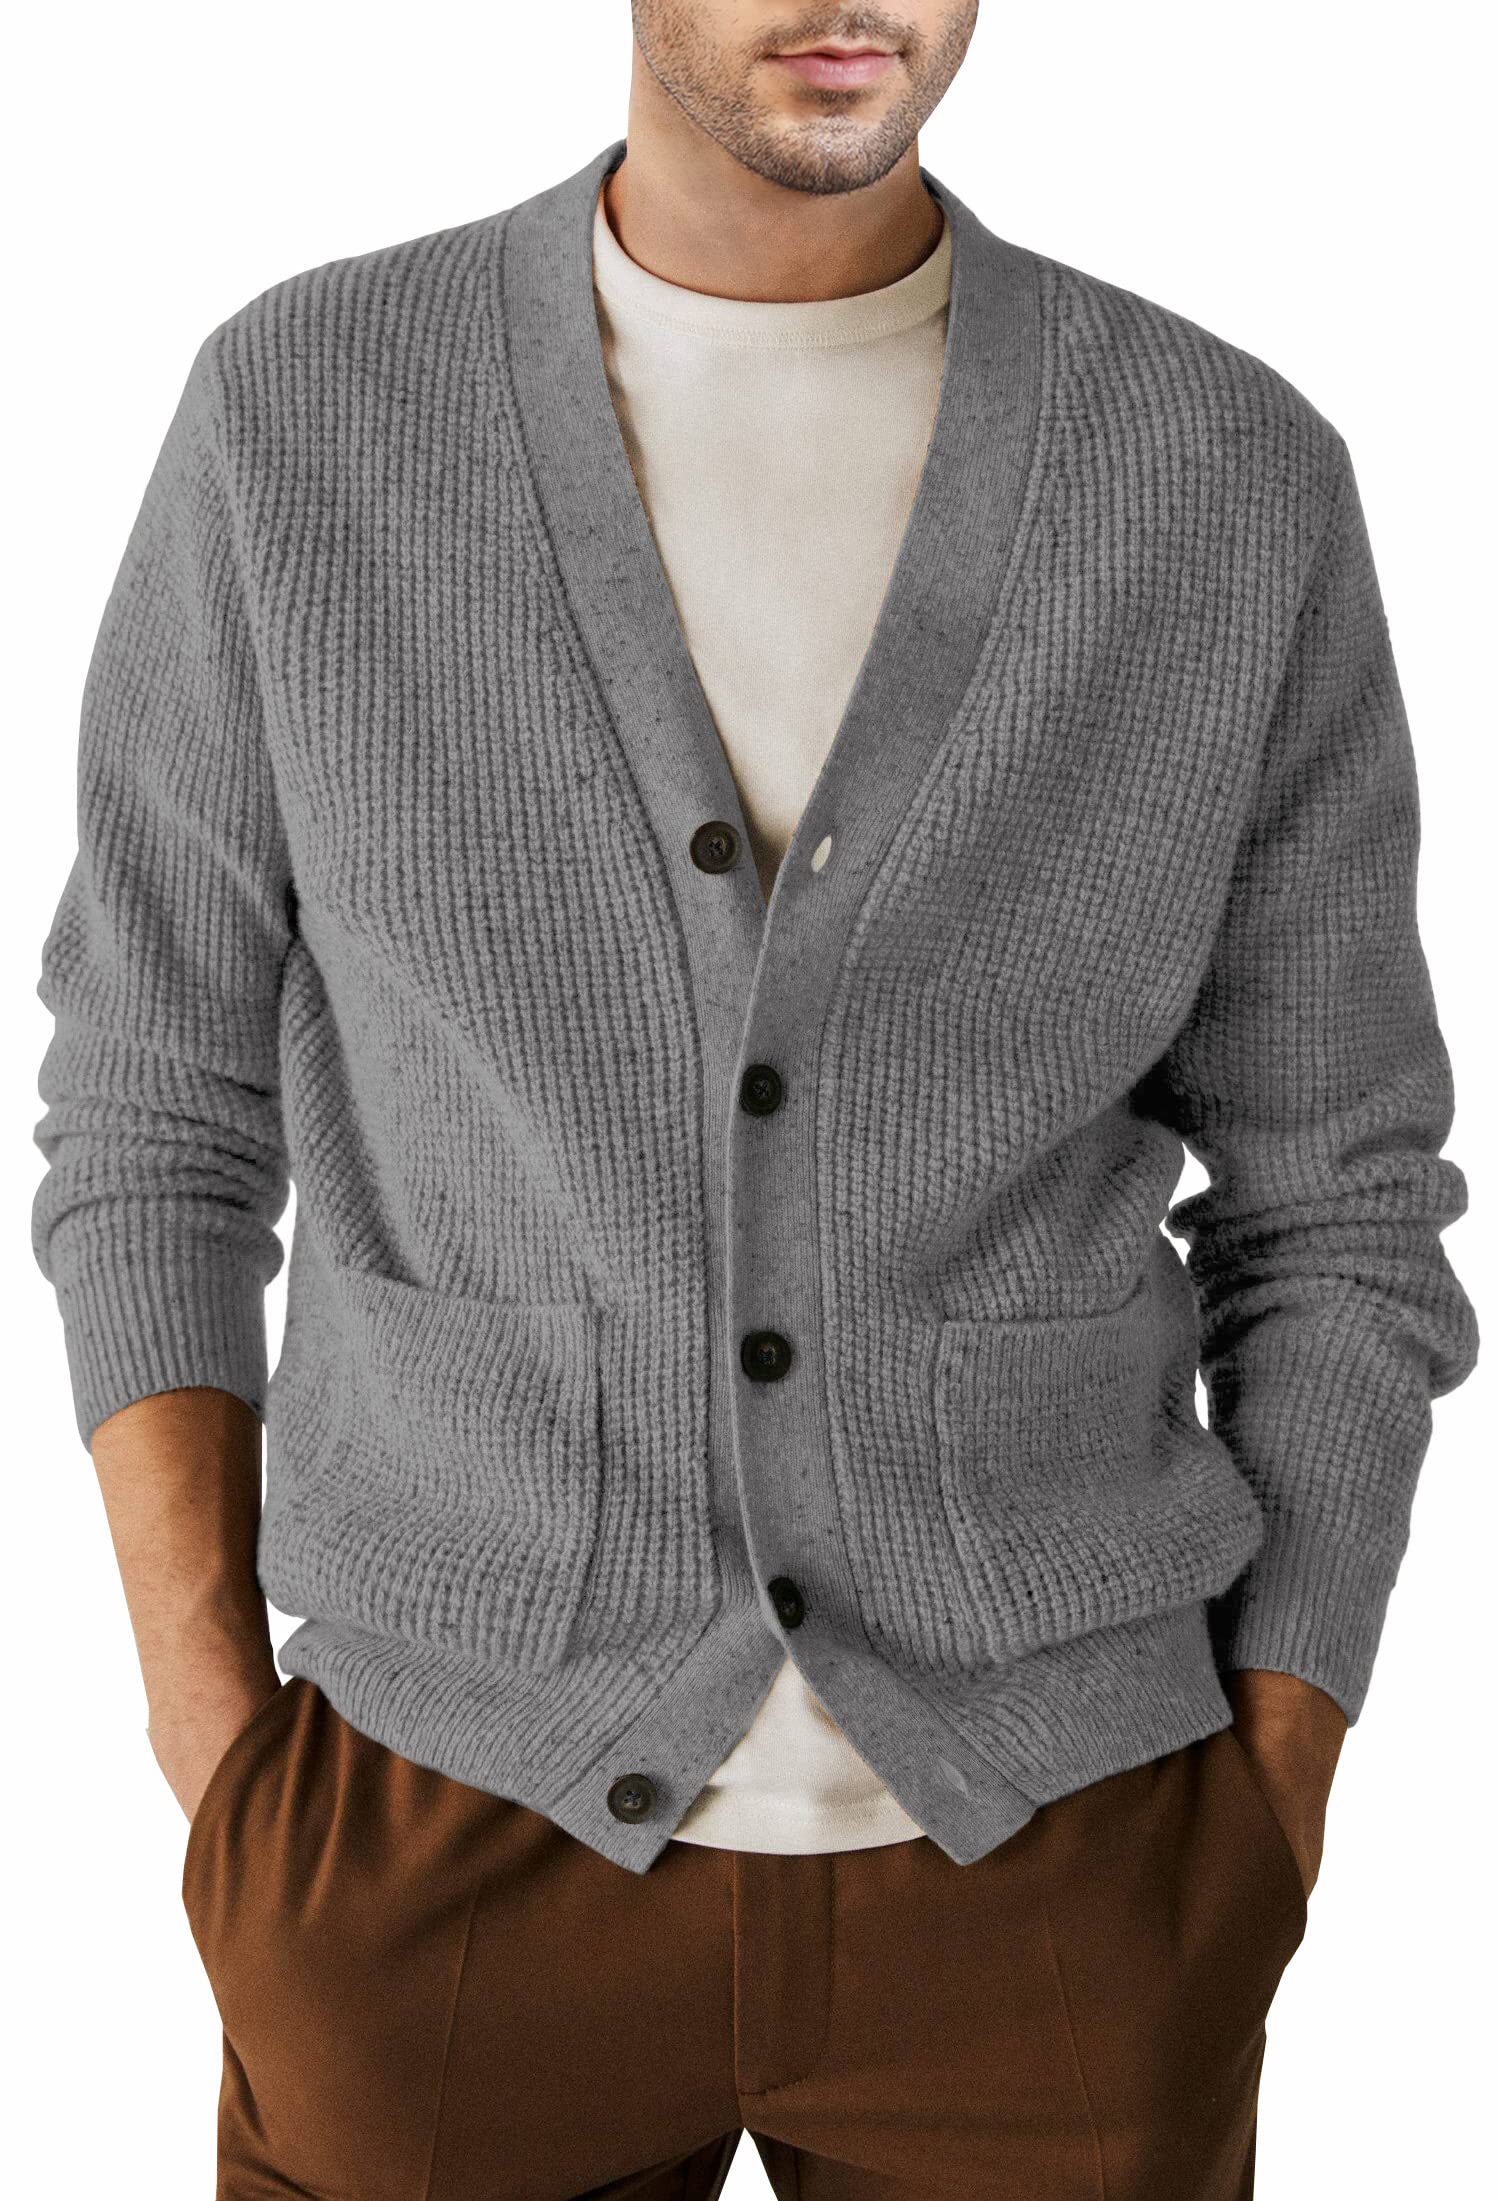 Mens cardigan sweaters, a timeless piece of clothing that has transcended fashion eras, is an essential element in any man’s wardrobe.